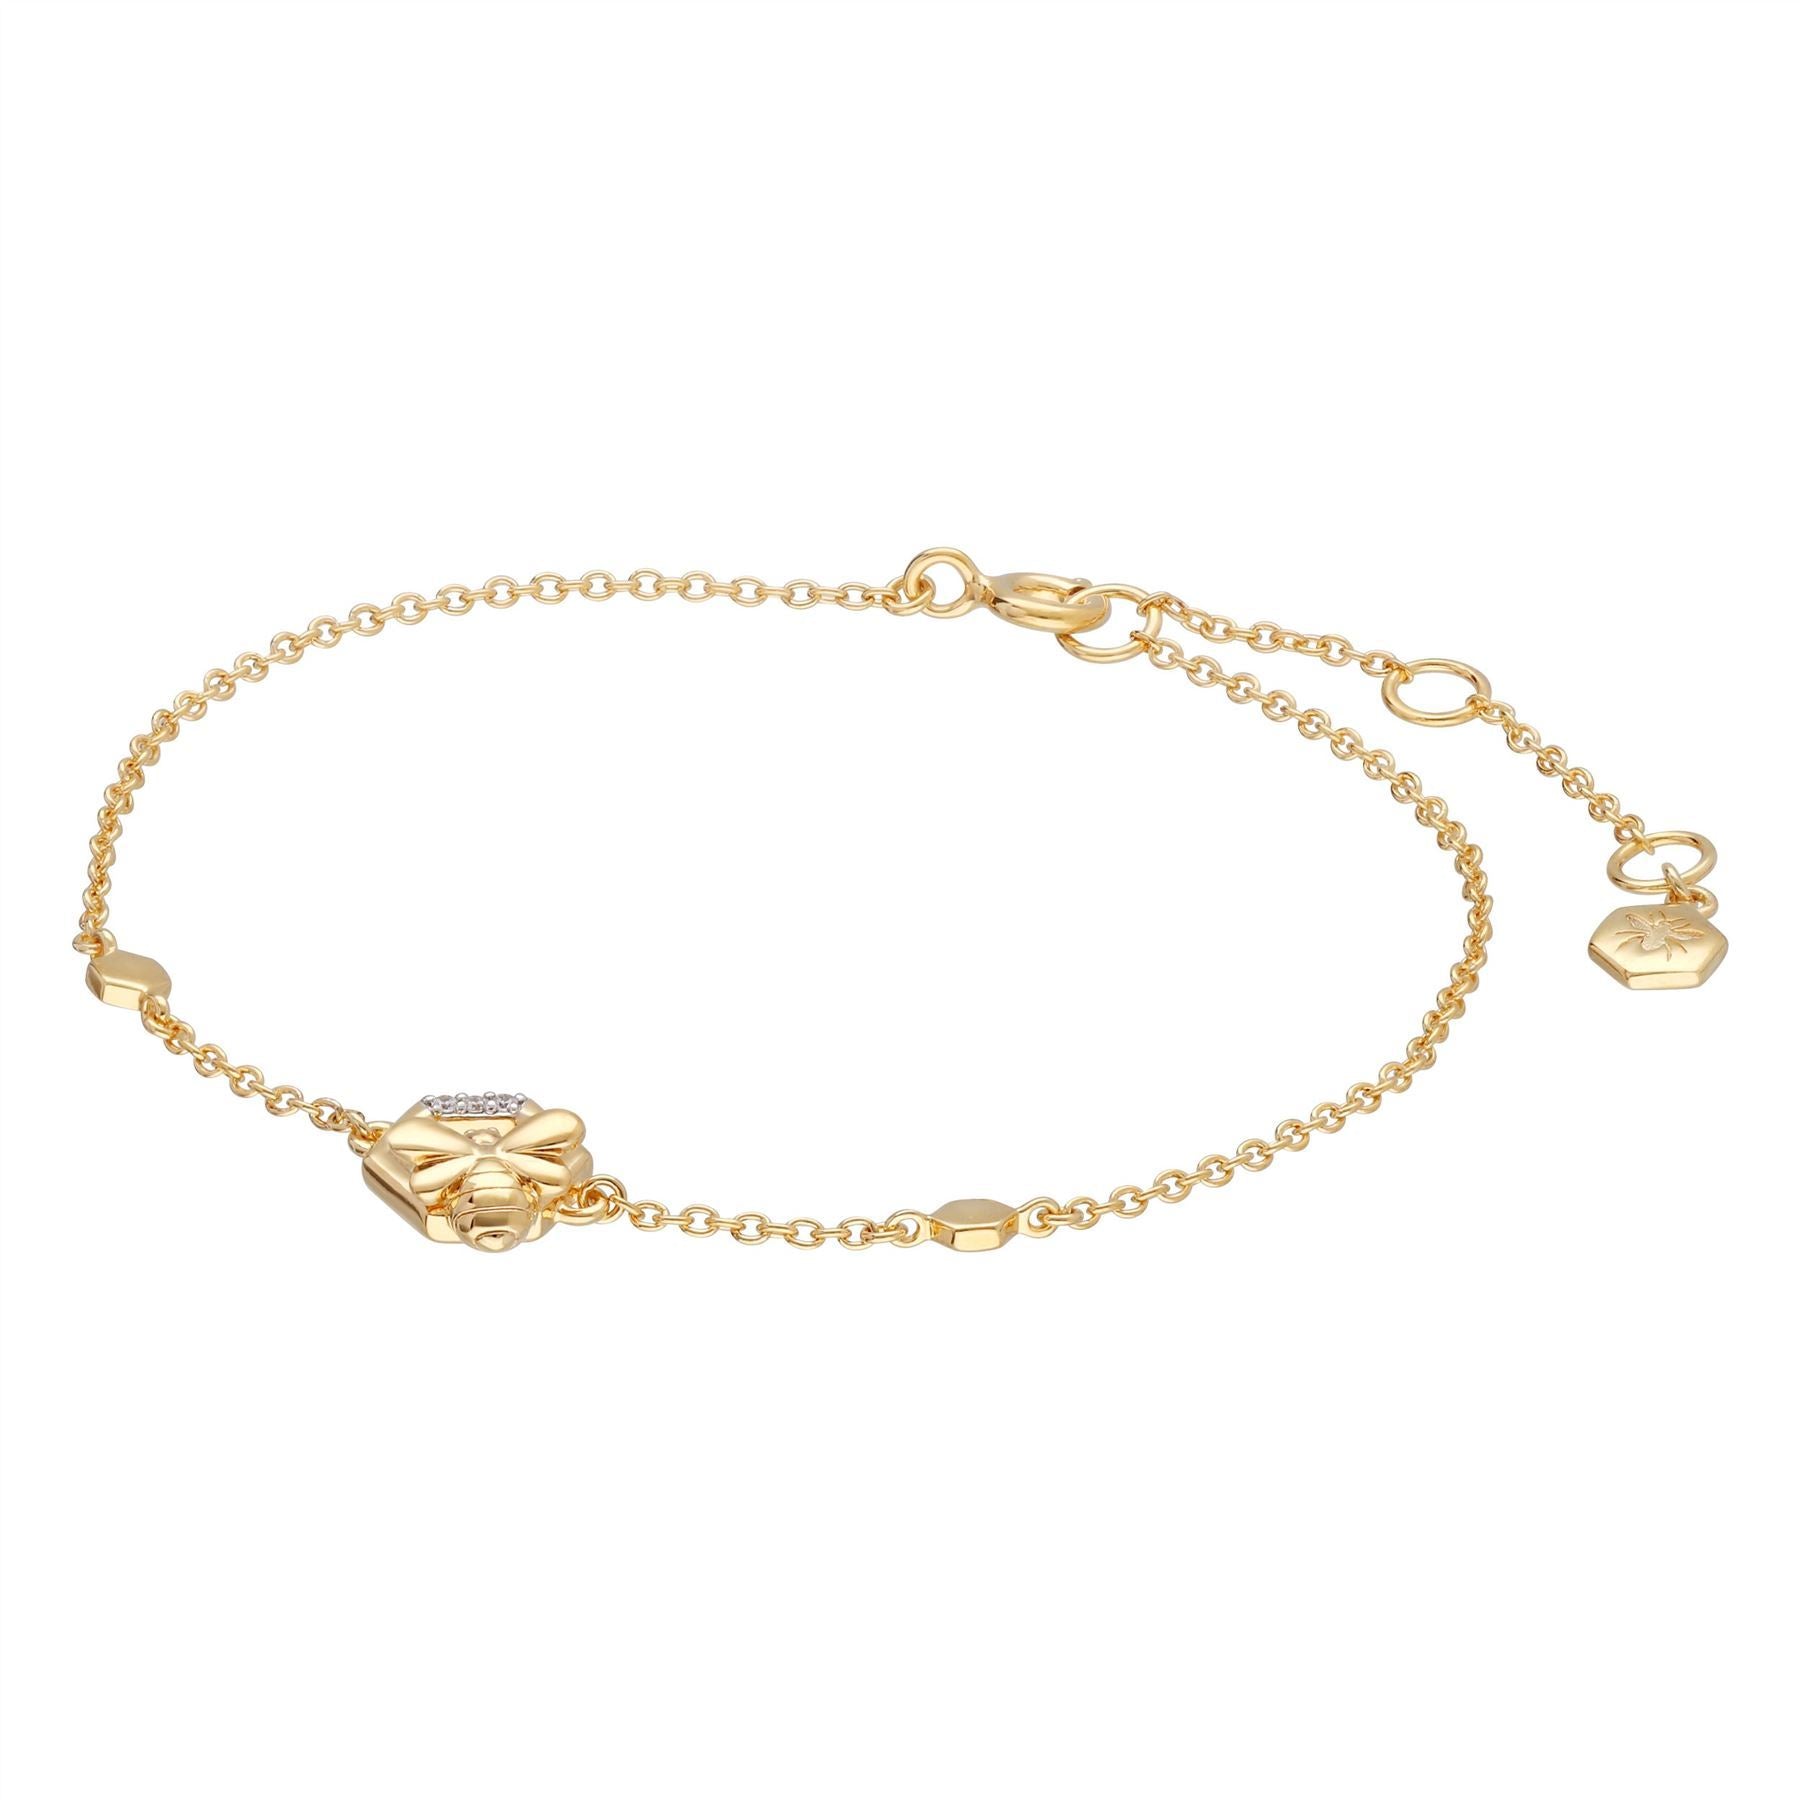 Honeycomb Inspired Bee Bracelet in 9ct Yellow Gold